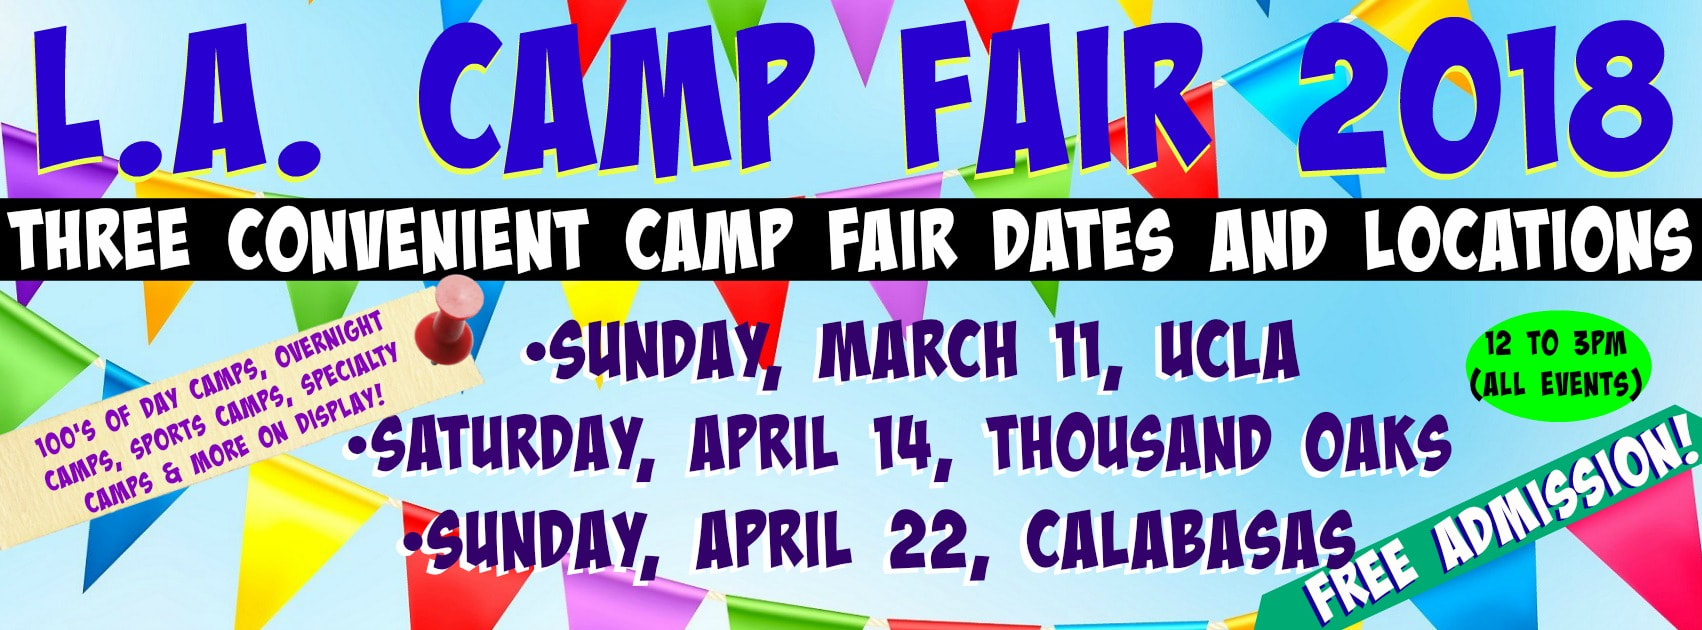 Find the perfect summer camp for your child at L.A. Camp Fair 2018